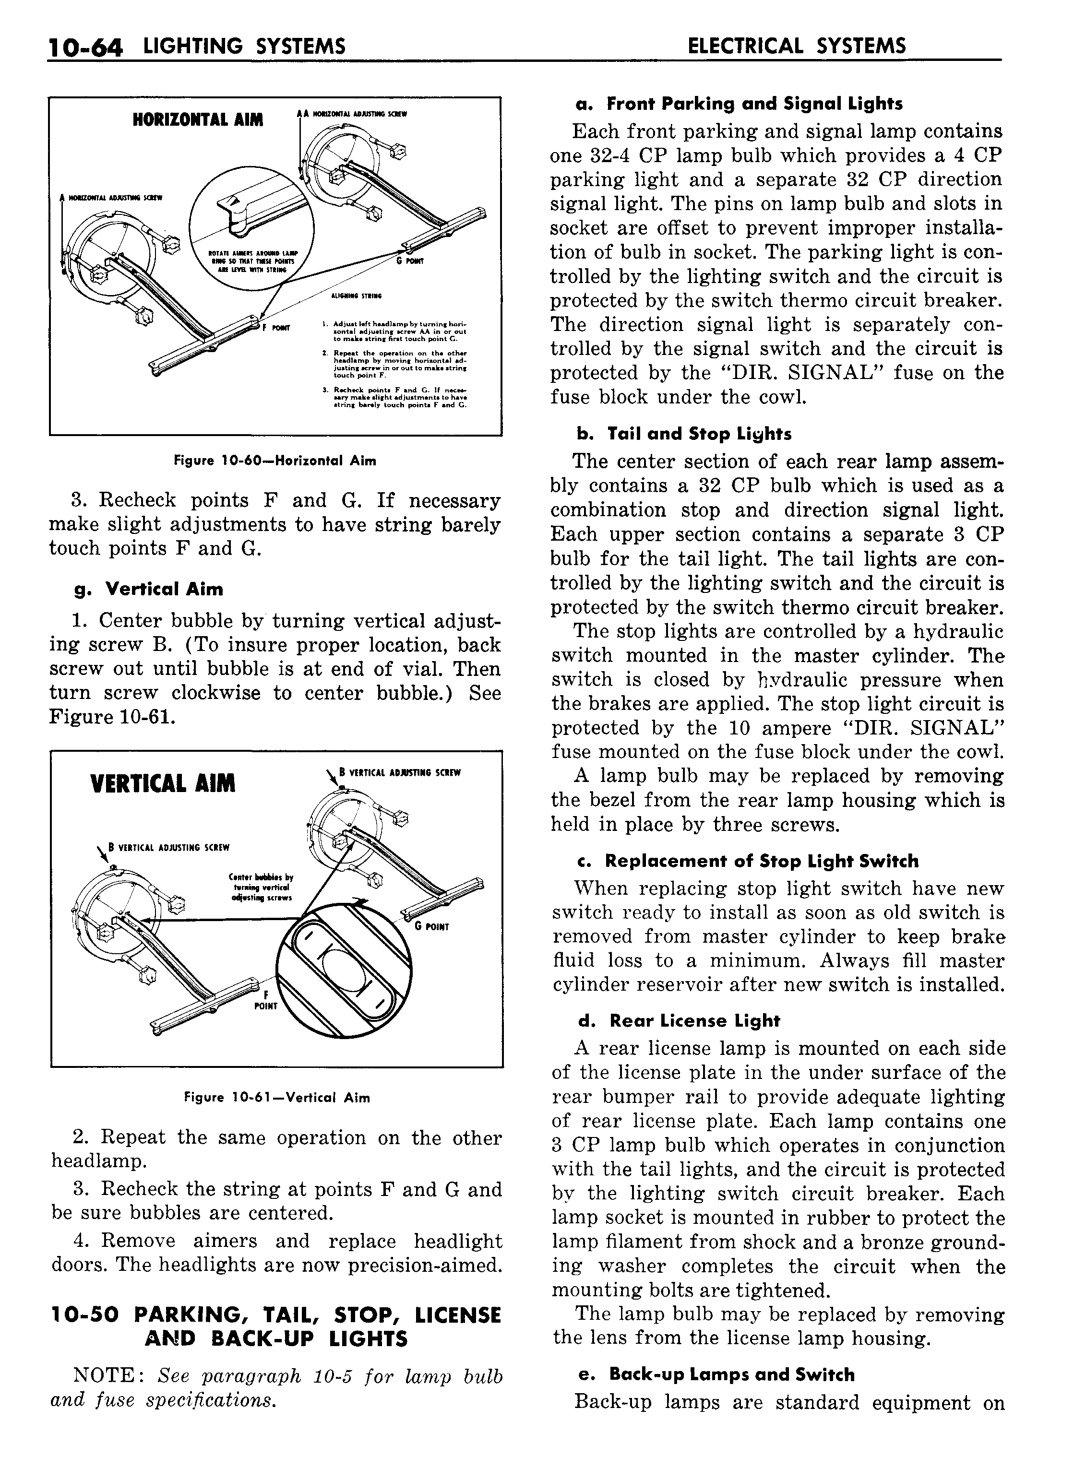 n_11 1957 Buick Shop Manual - Electrical Systems-064-064.jpg